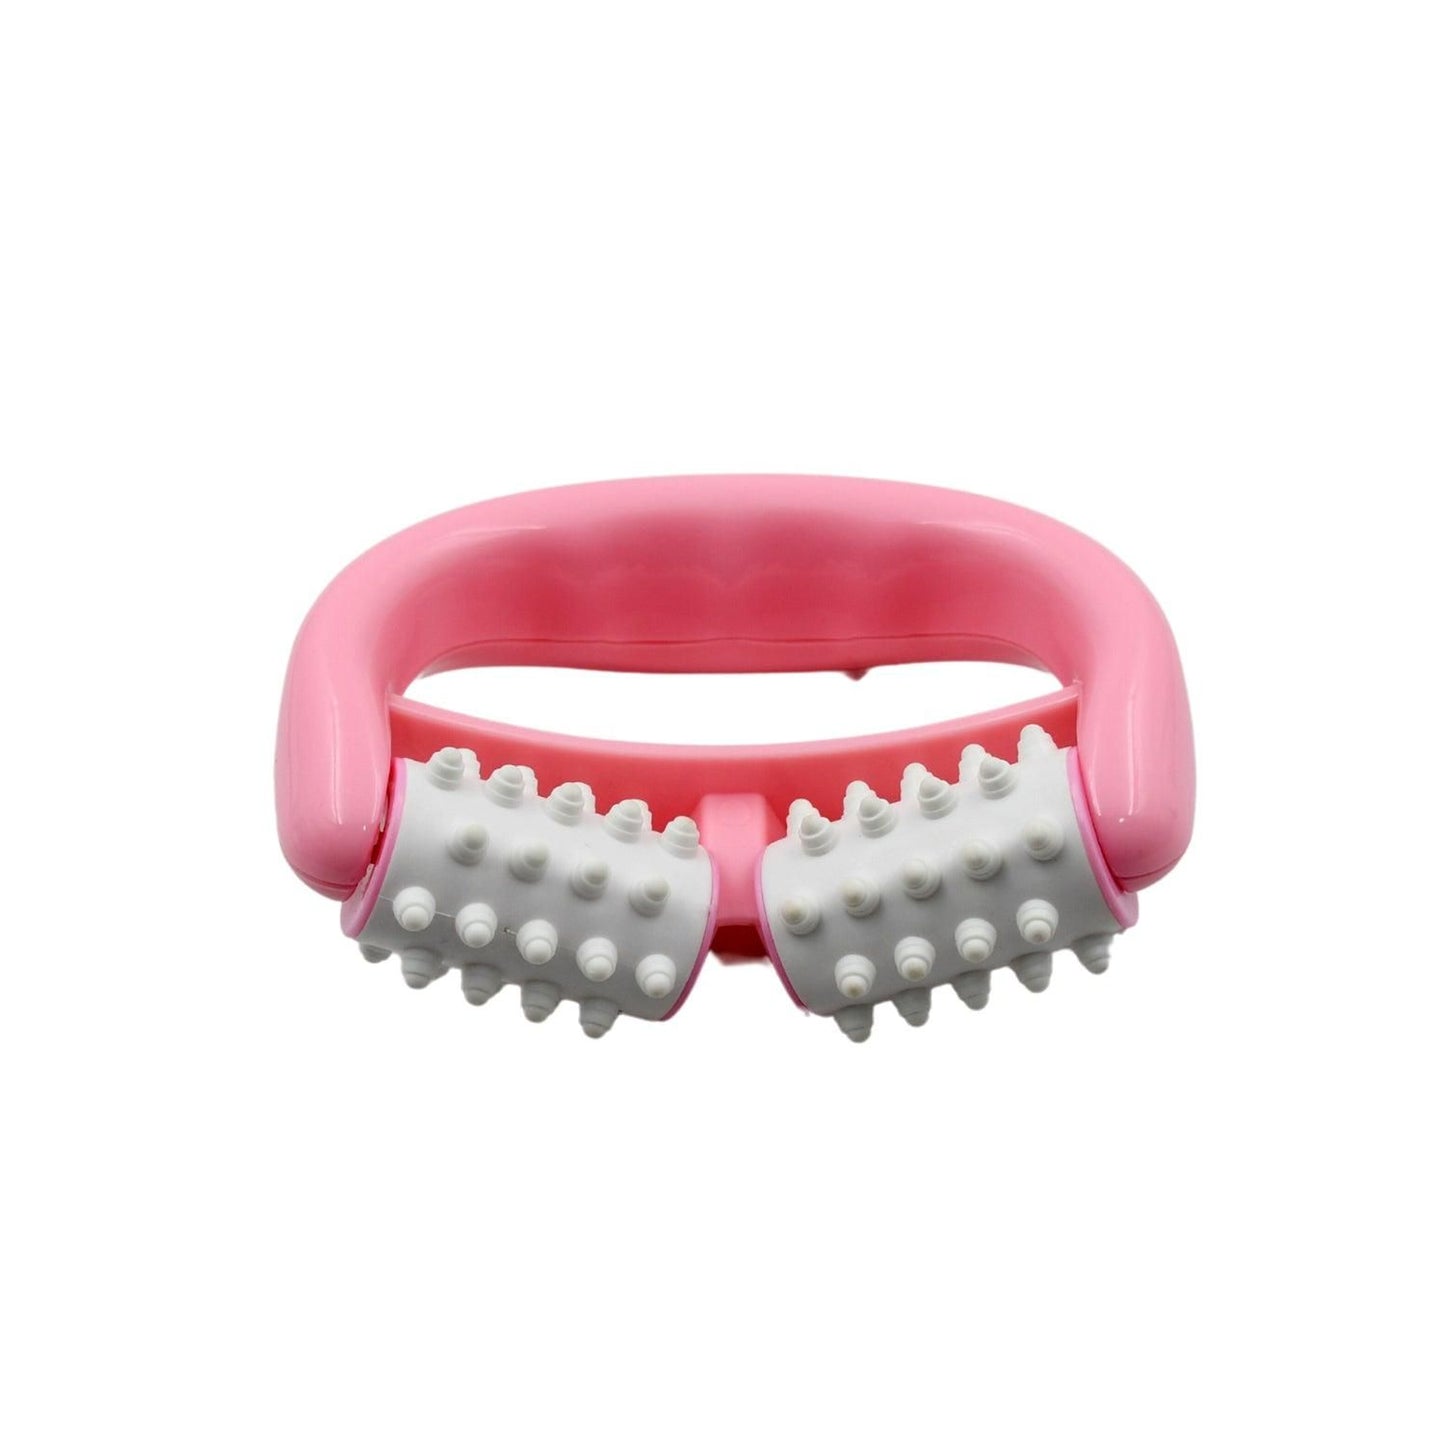 Manual Round Handle Plastic 2 Rollers Massage